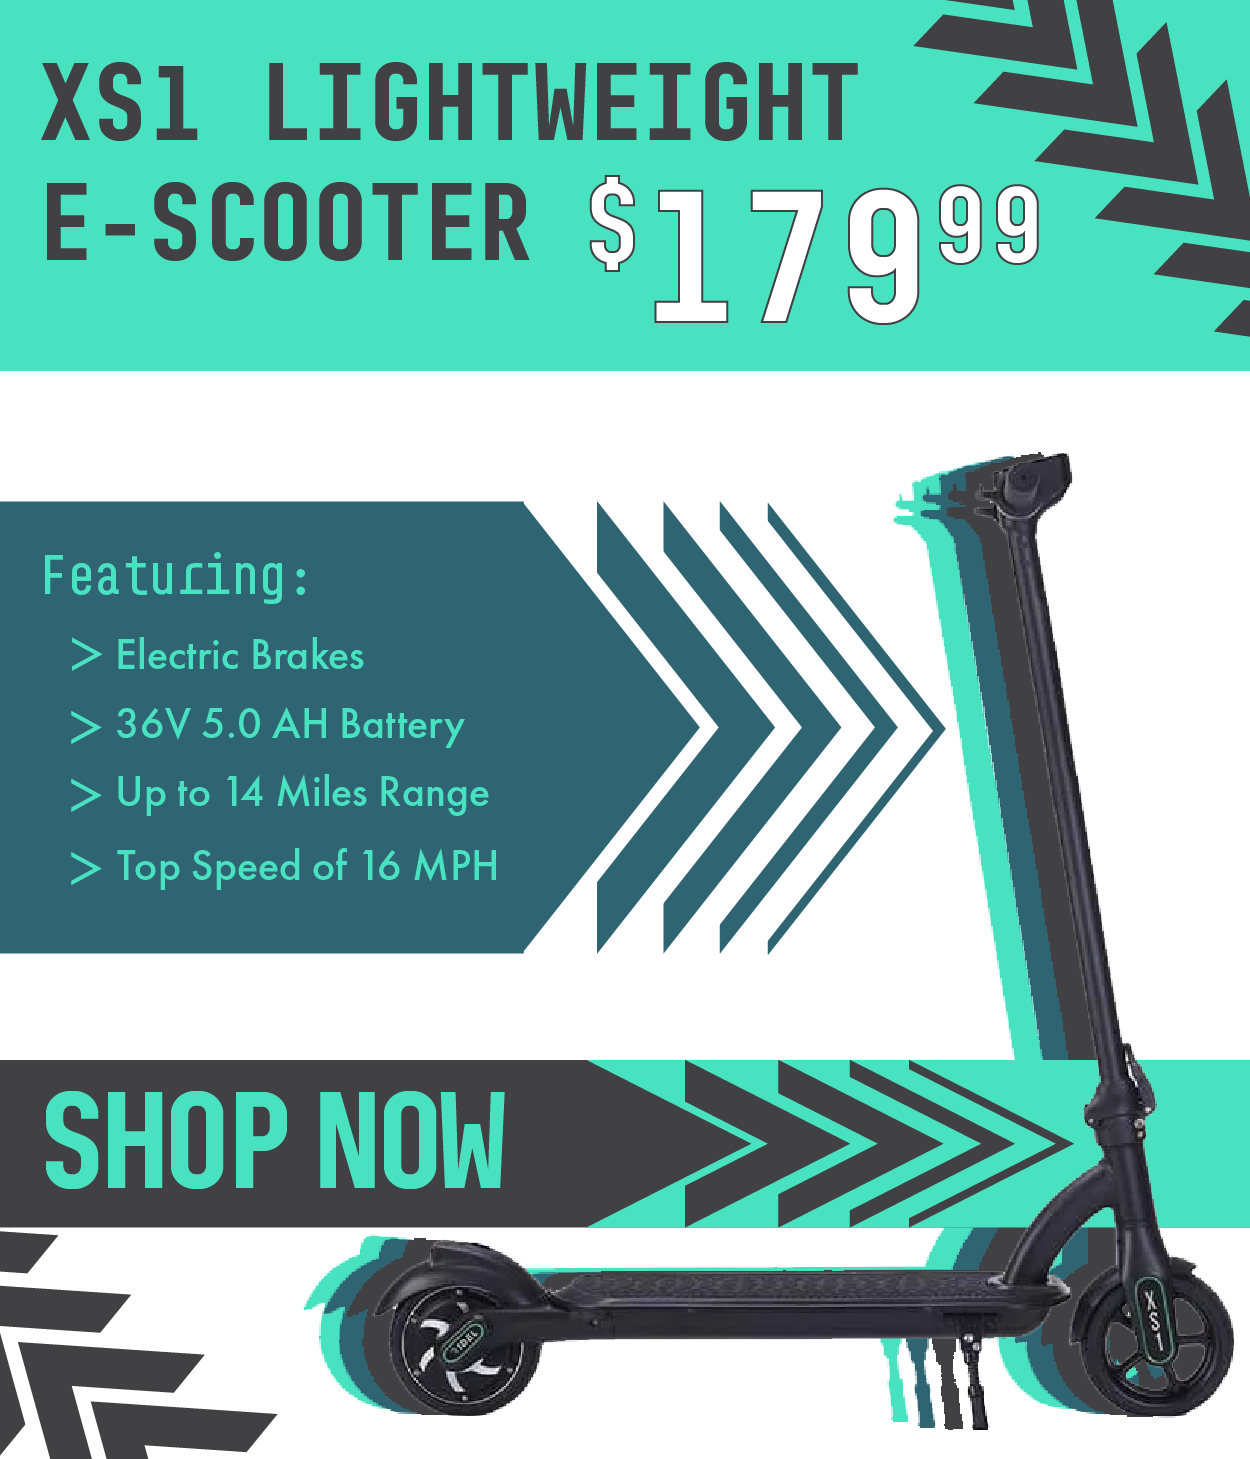 XS1 Lightweight E-Scooter, only $179.99. Featuring electric brakes, a 36V 5.0 AH battery, up to 14 miles of range and a top speed of 16 miles per hour.